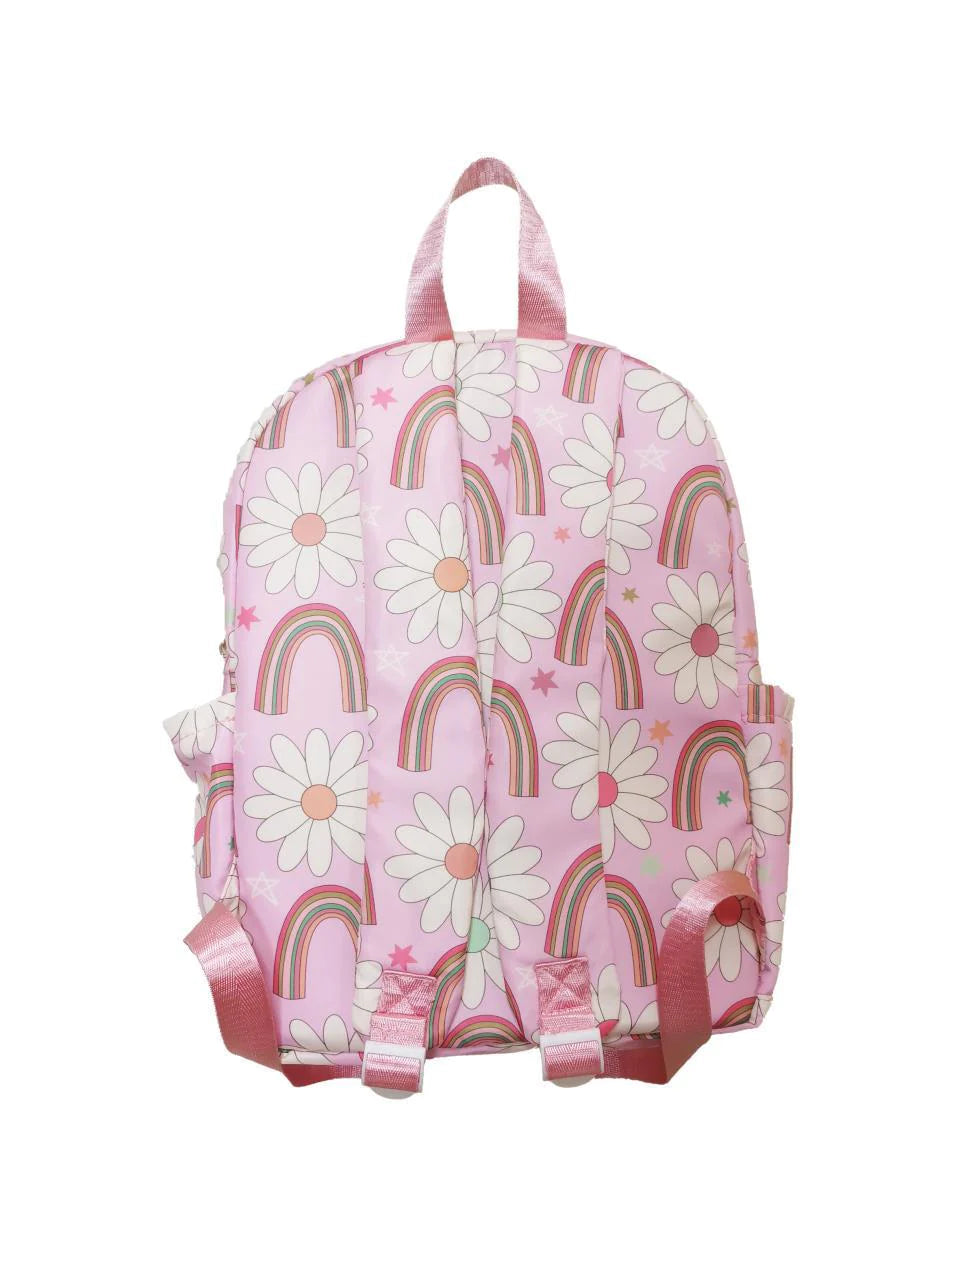 Rainbow Daisies Backpack  - Doodlebug's Children's Boutique